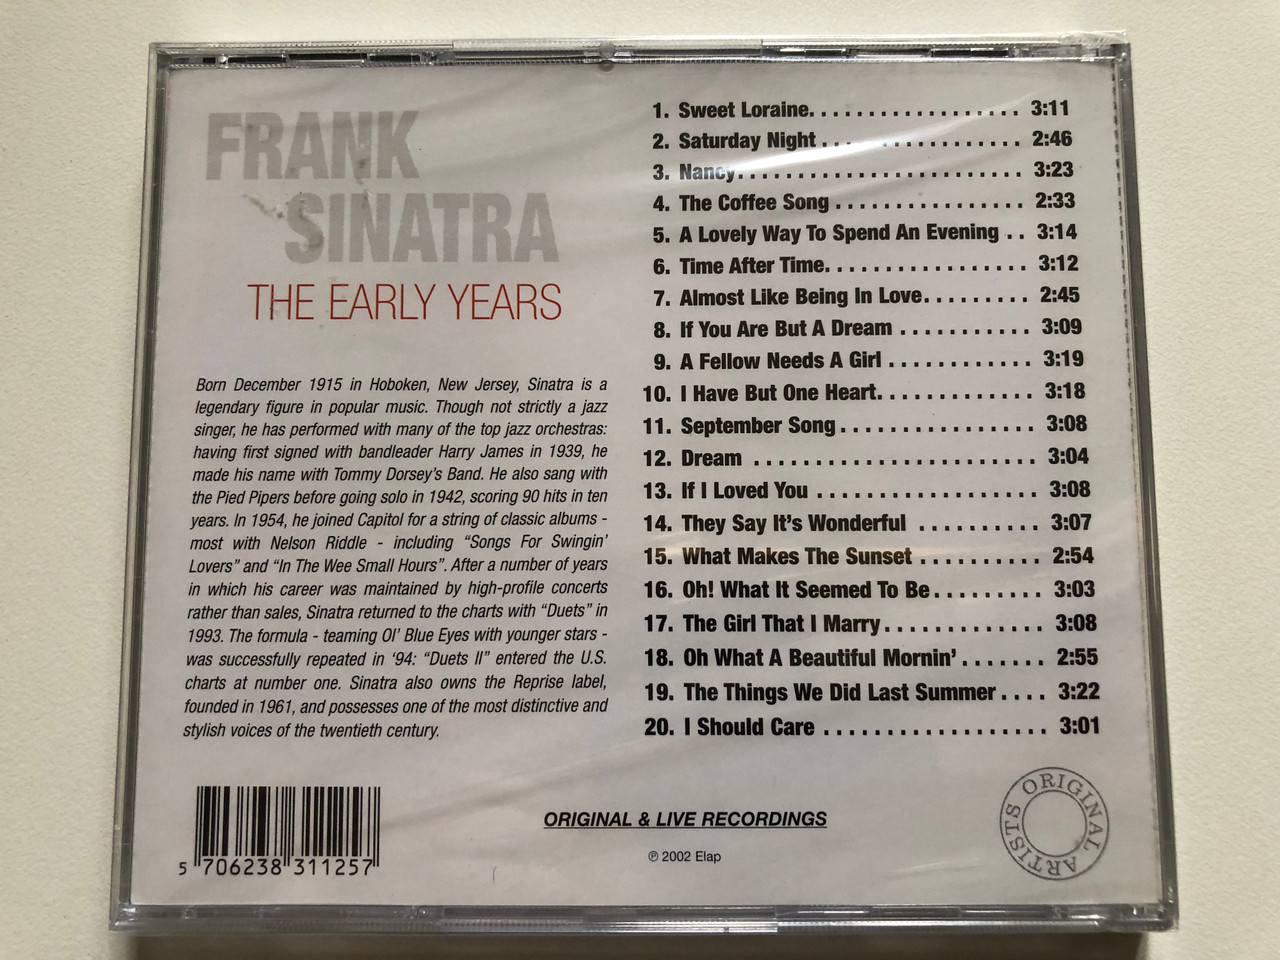 https://cdn10.bigcommerce.com/s-62bdpkt7pb/products/0/images/311341/Frank_Sinatra_The_Early_Years_Elap_Music_Audio_CD_2002_50173772_2__52202.1699604453.1280.1280.JPG?c=2